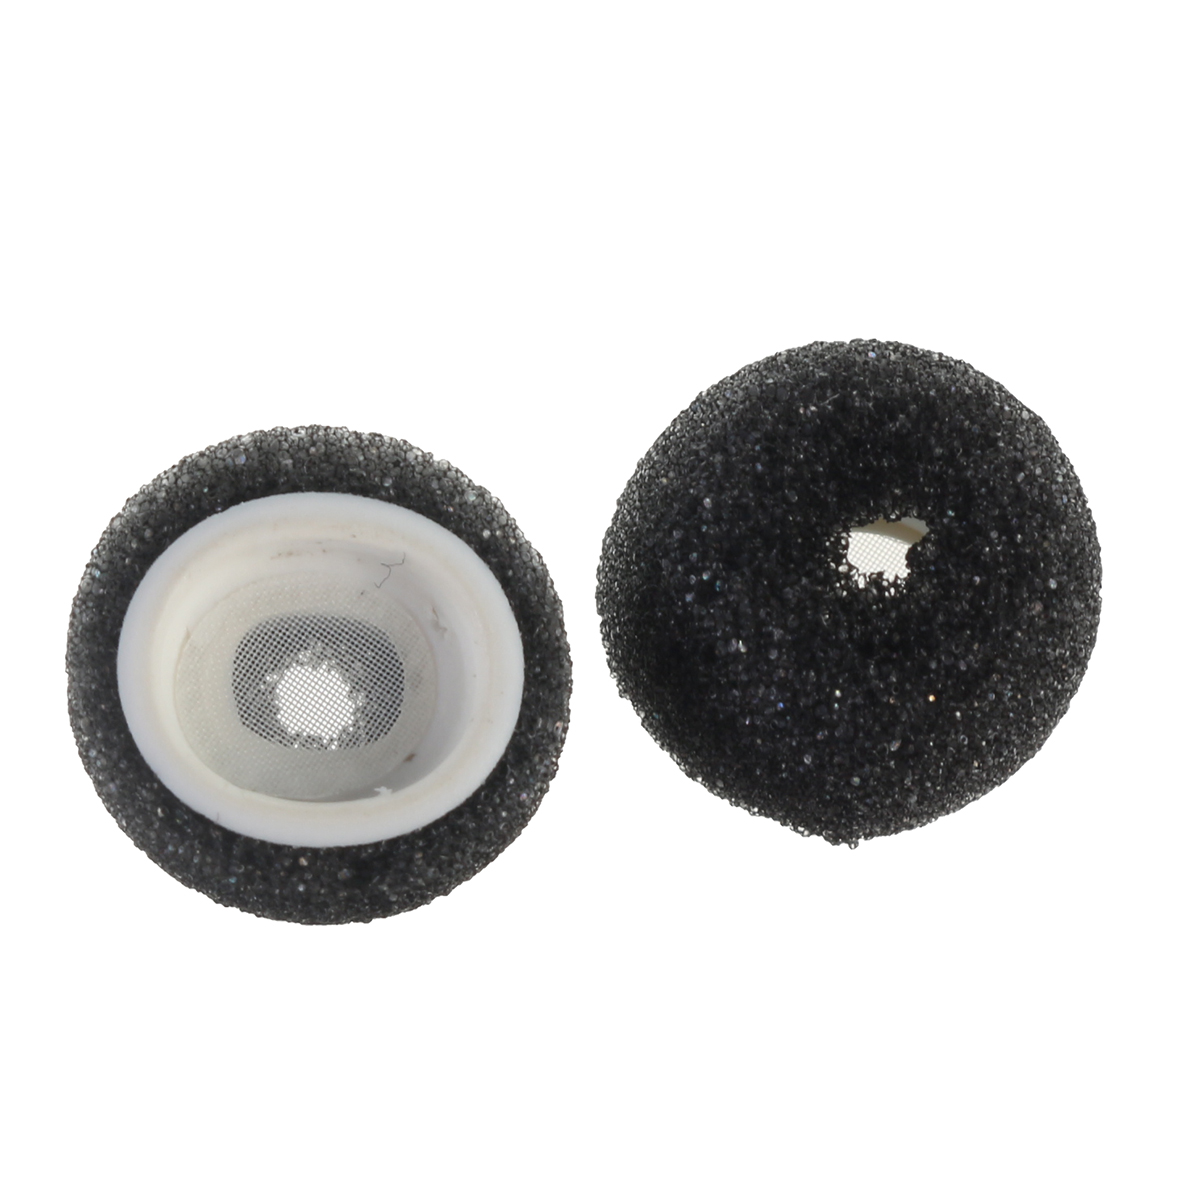 2PCS-Soft-Memory-Foam-Earbud-Tip-Buds-Cap-for-Airpods-Pro-for-Airpods-3-Earphone-1638244-7